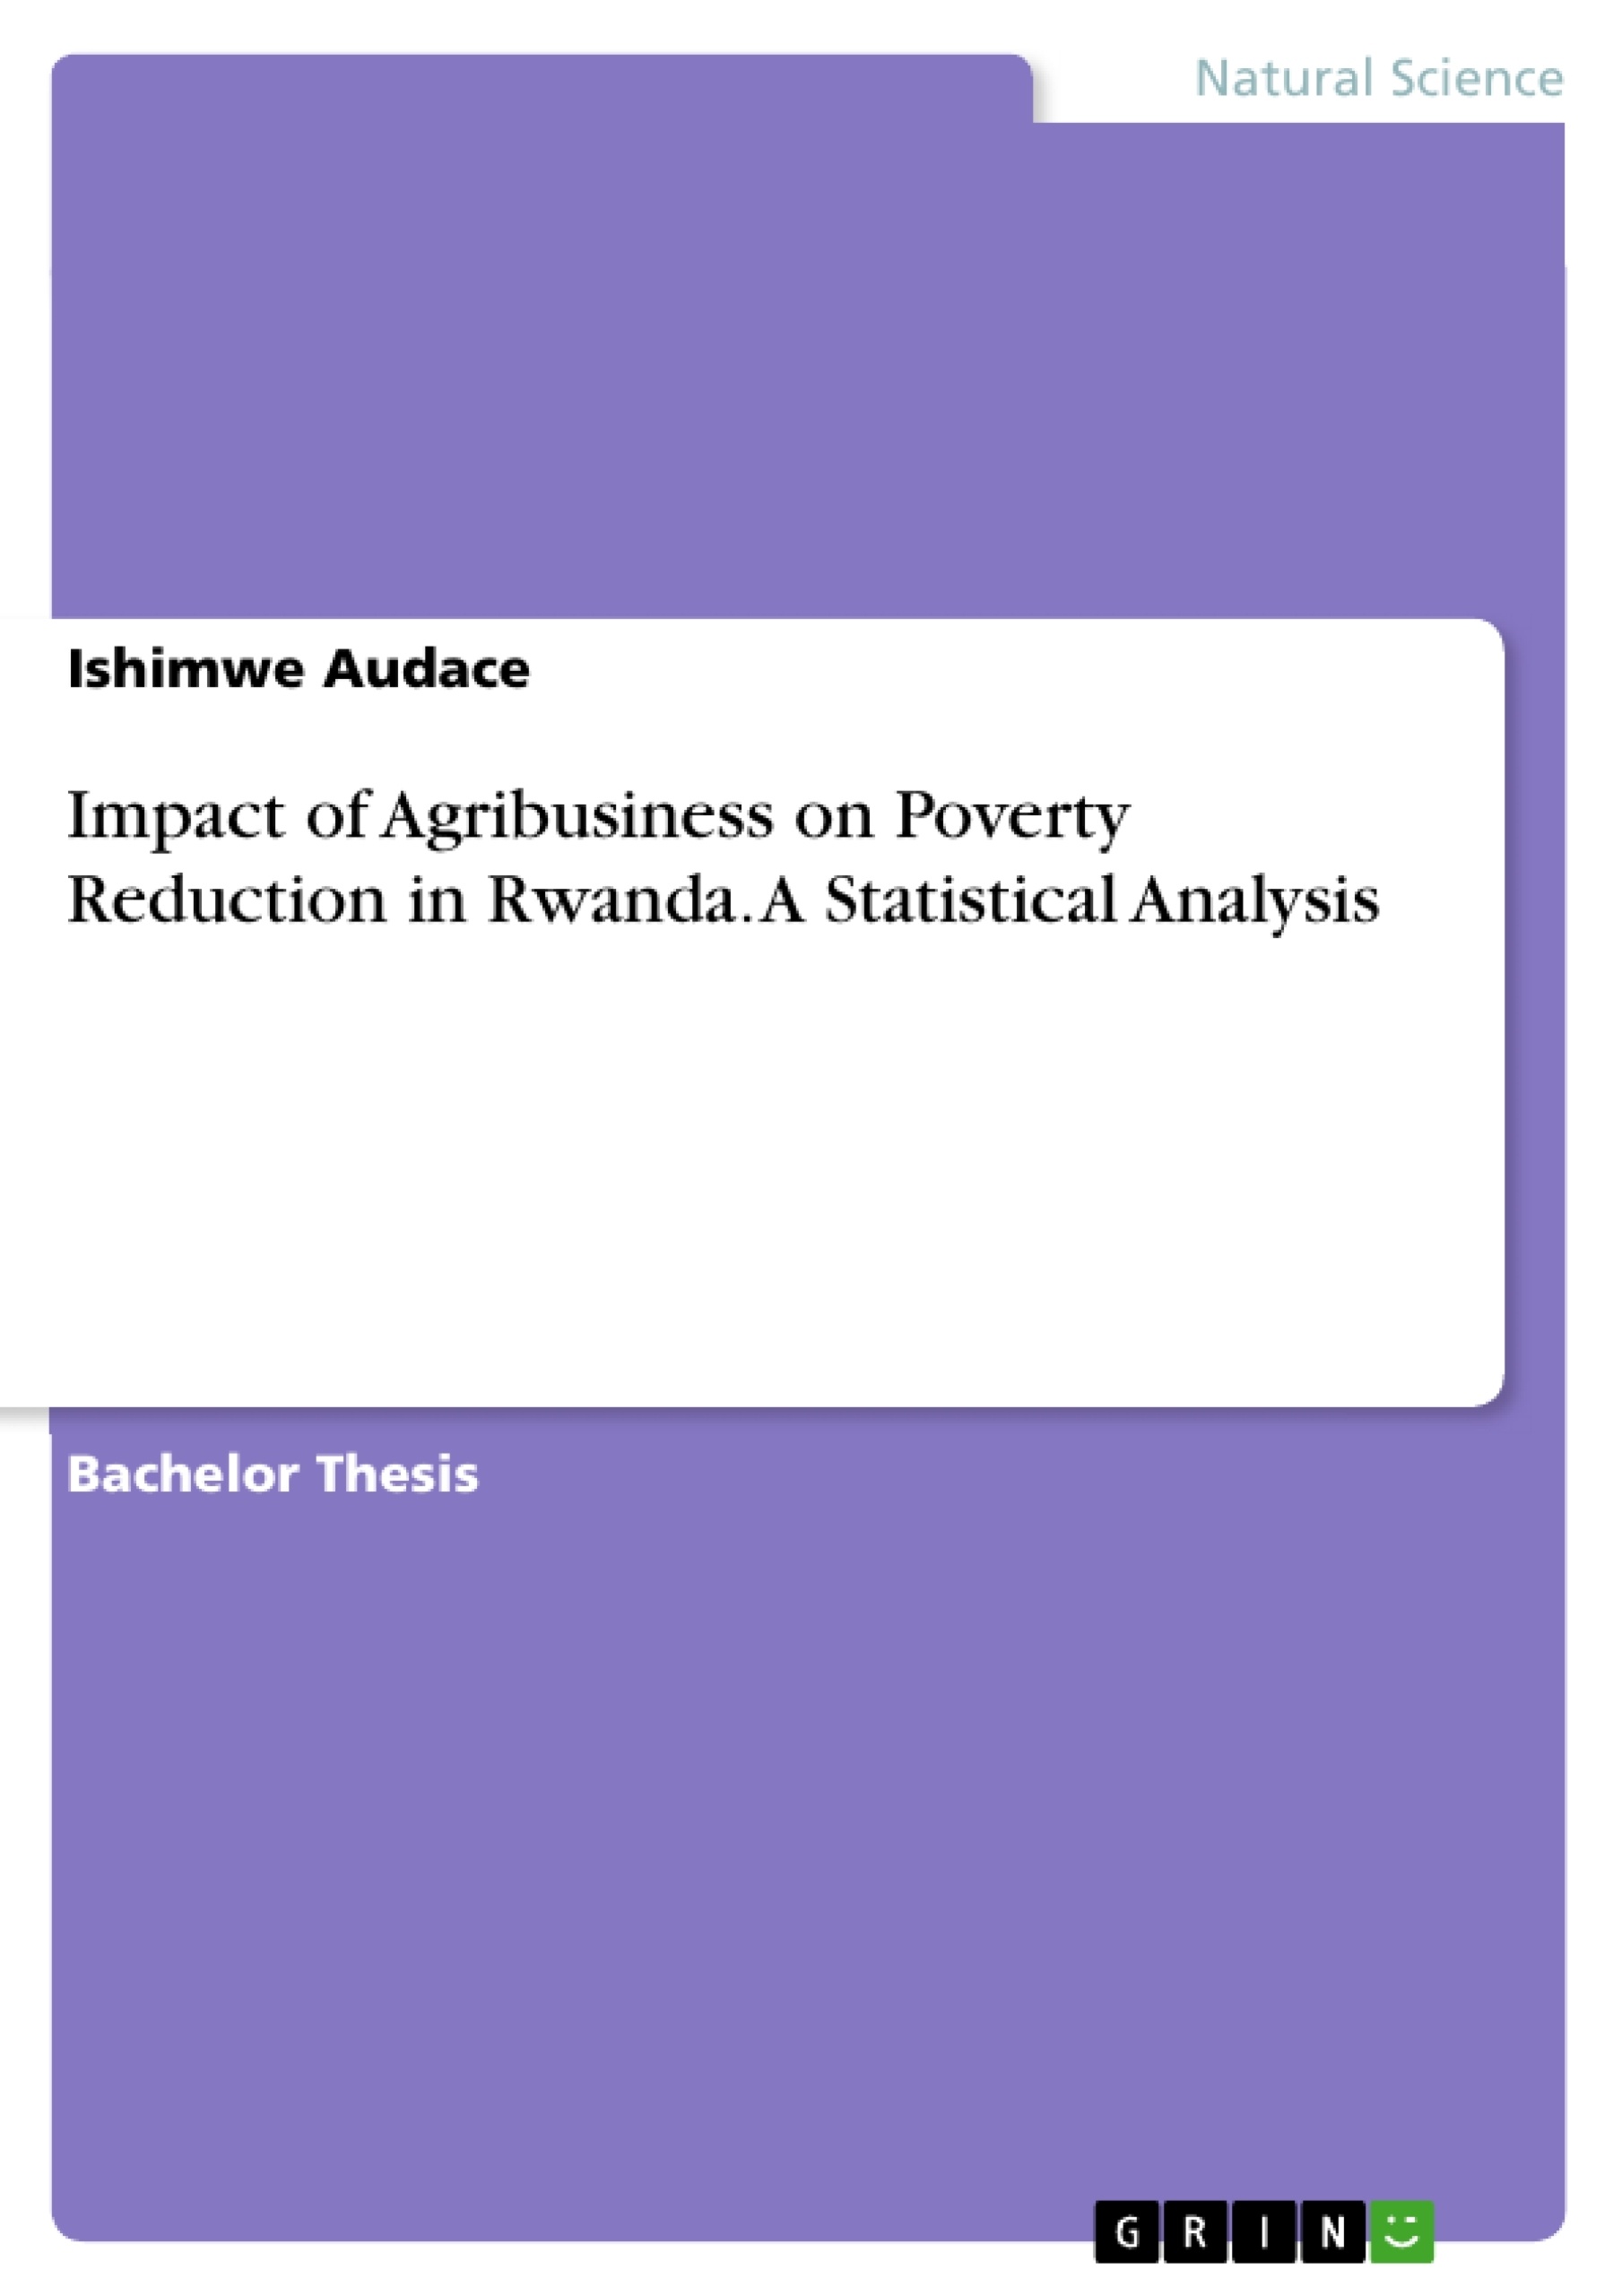 Título: Impact of Agribusiness on Poverty Reduction in Rwanda. A Statistical Analysis